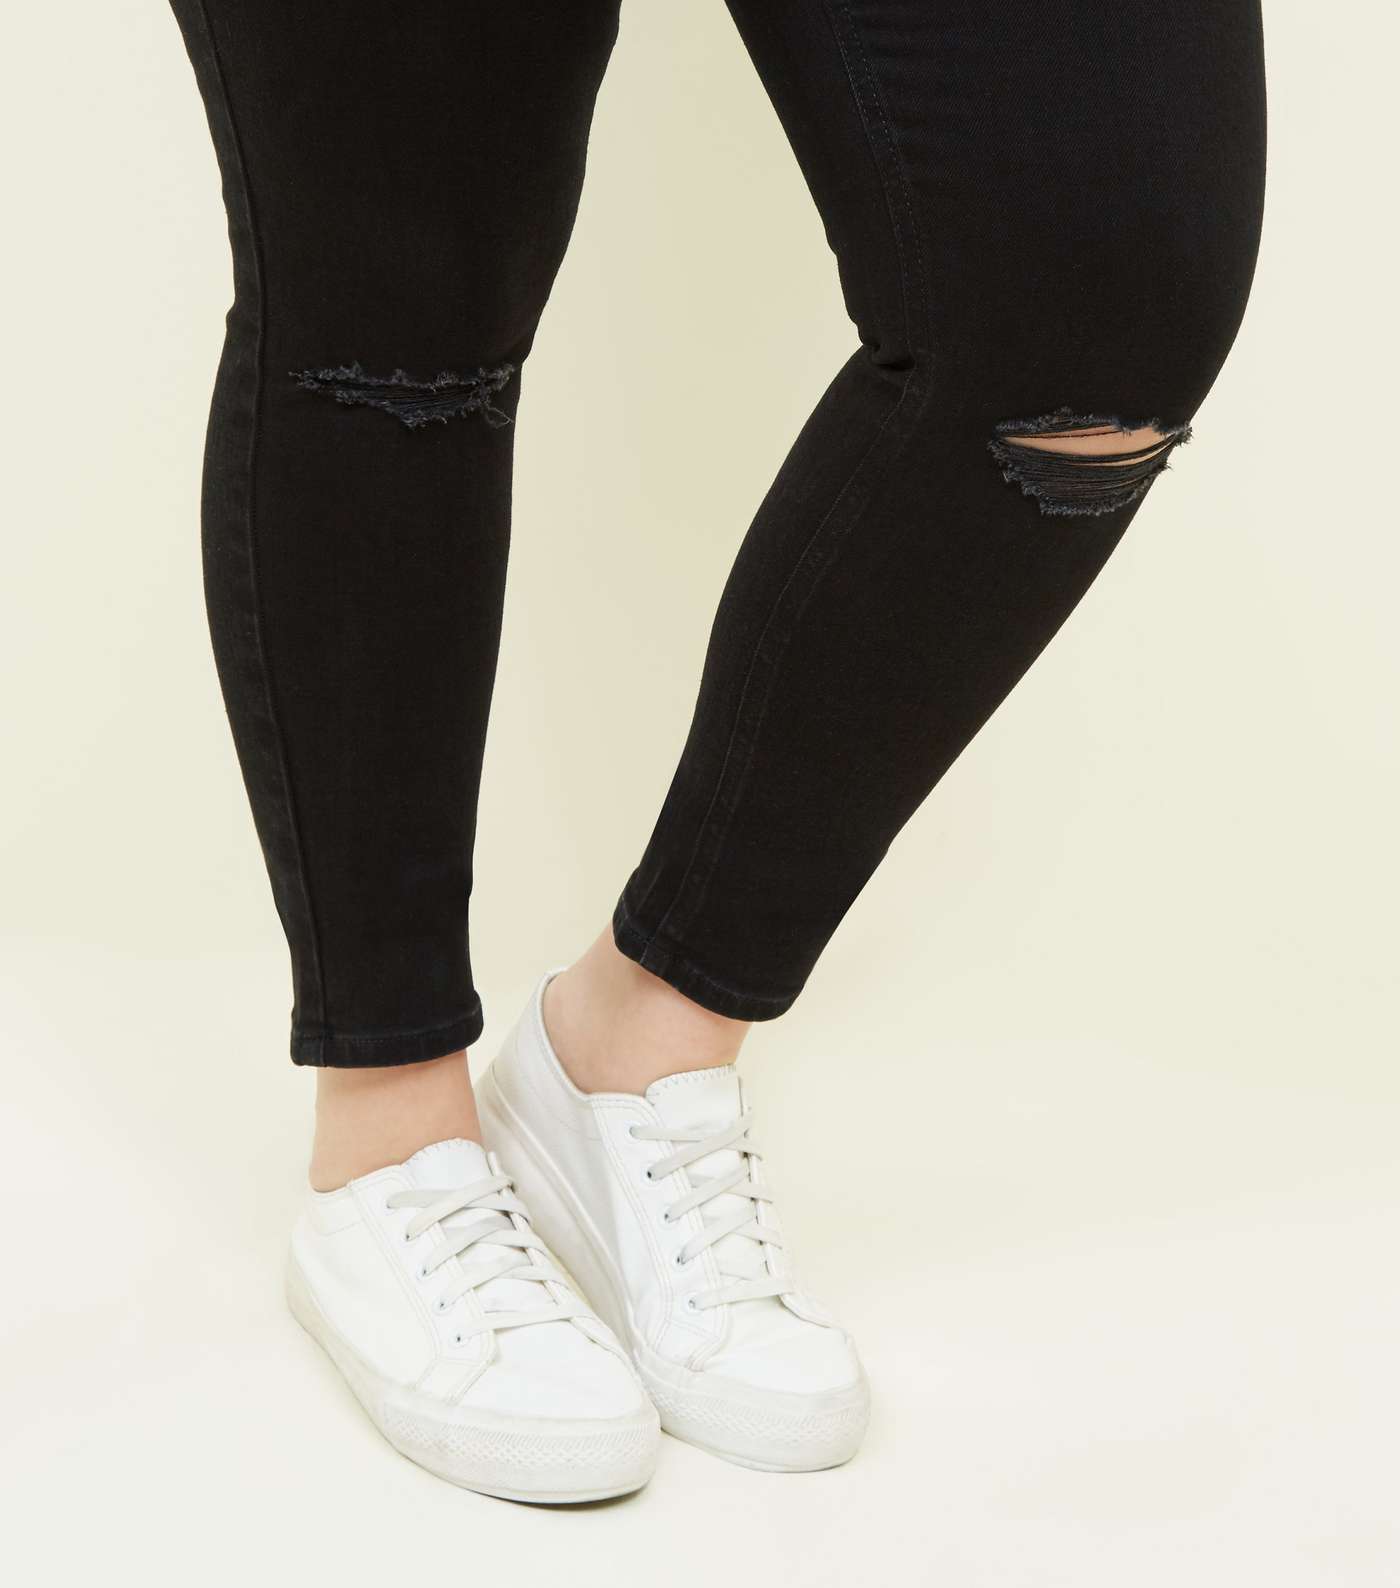 Curves Black High Waist 3 Button Ripped Jeans  Image 5